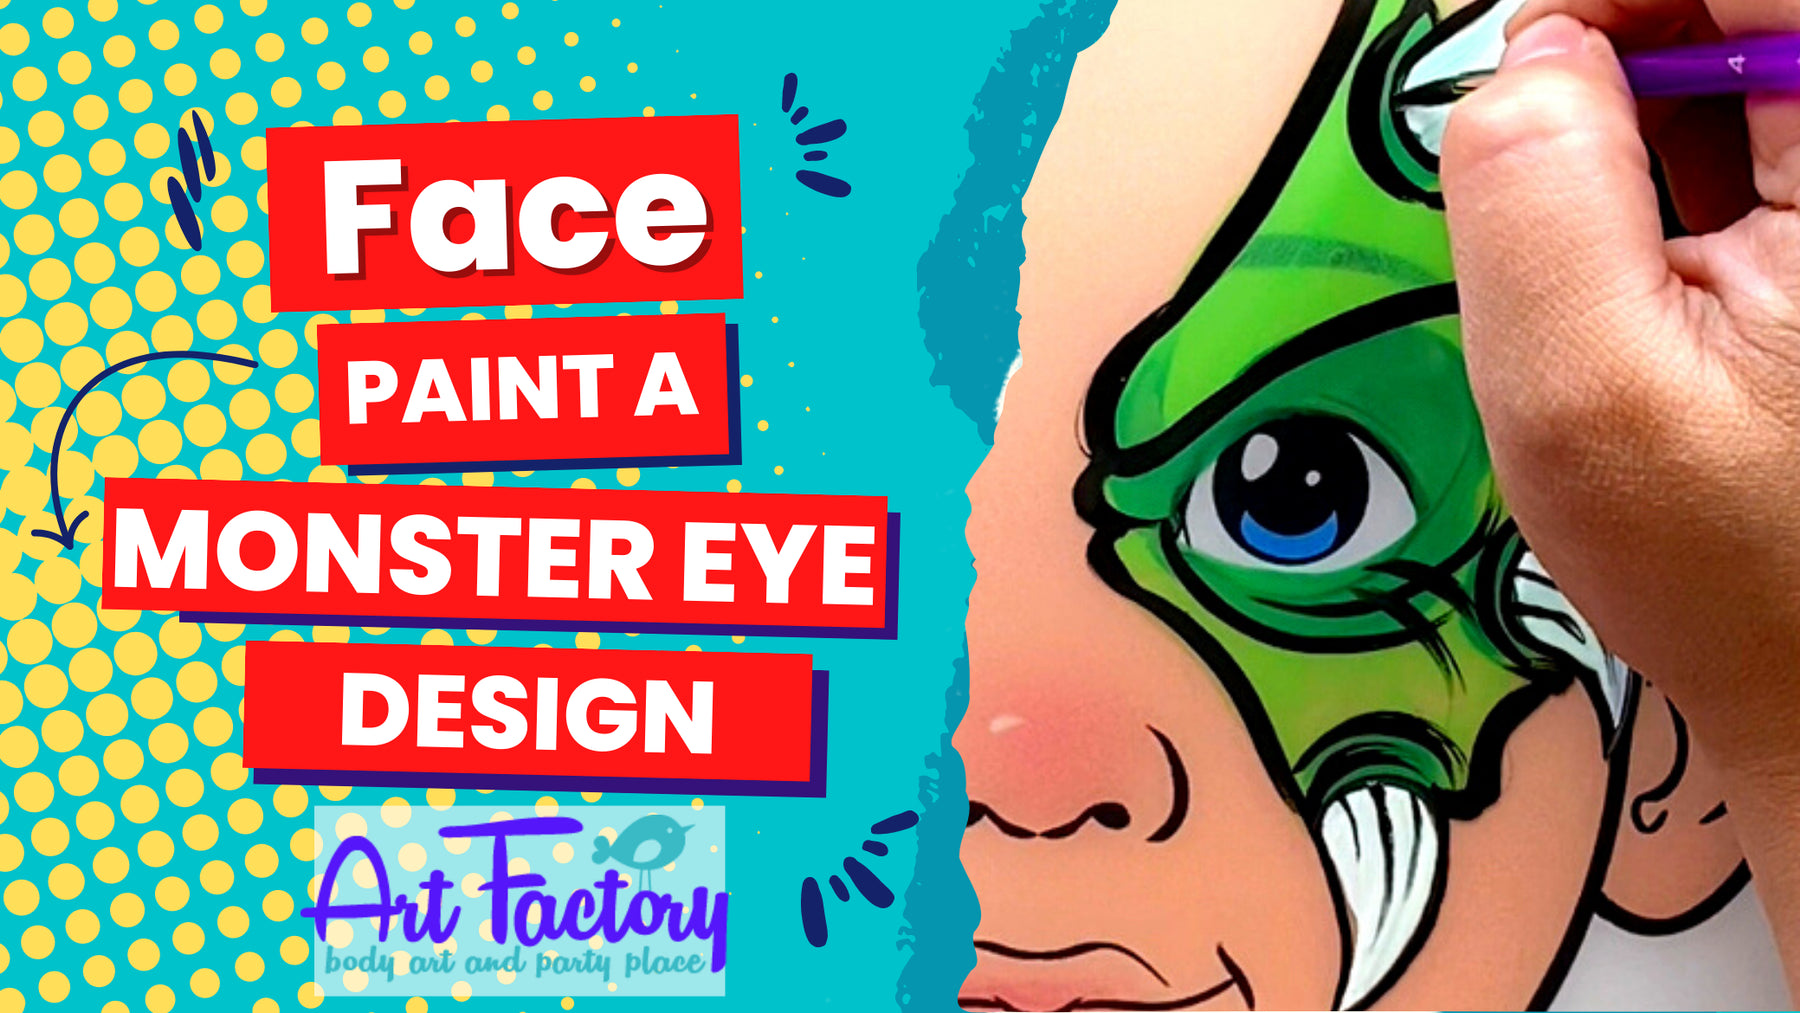 How to Face Paint a Monster Eye Design